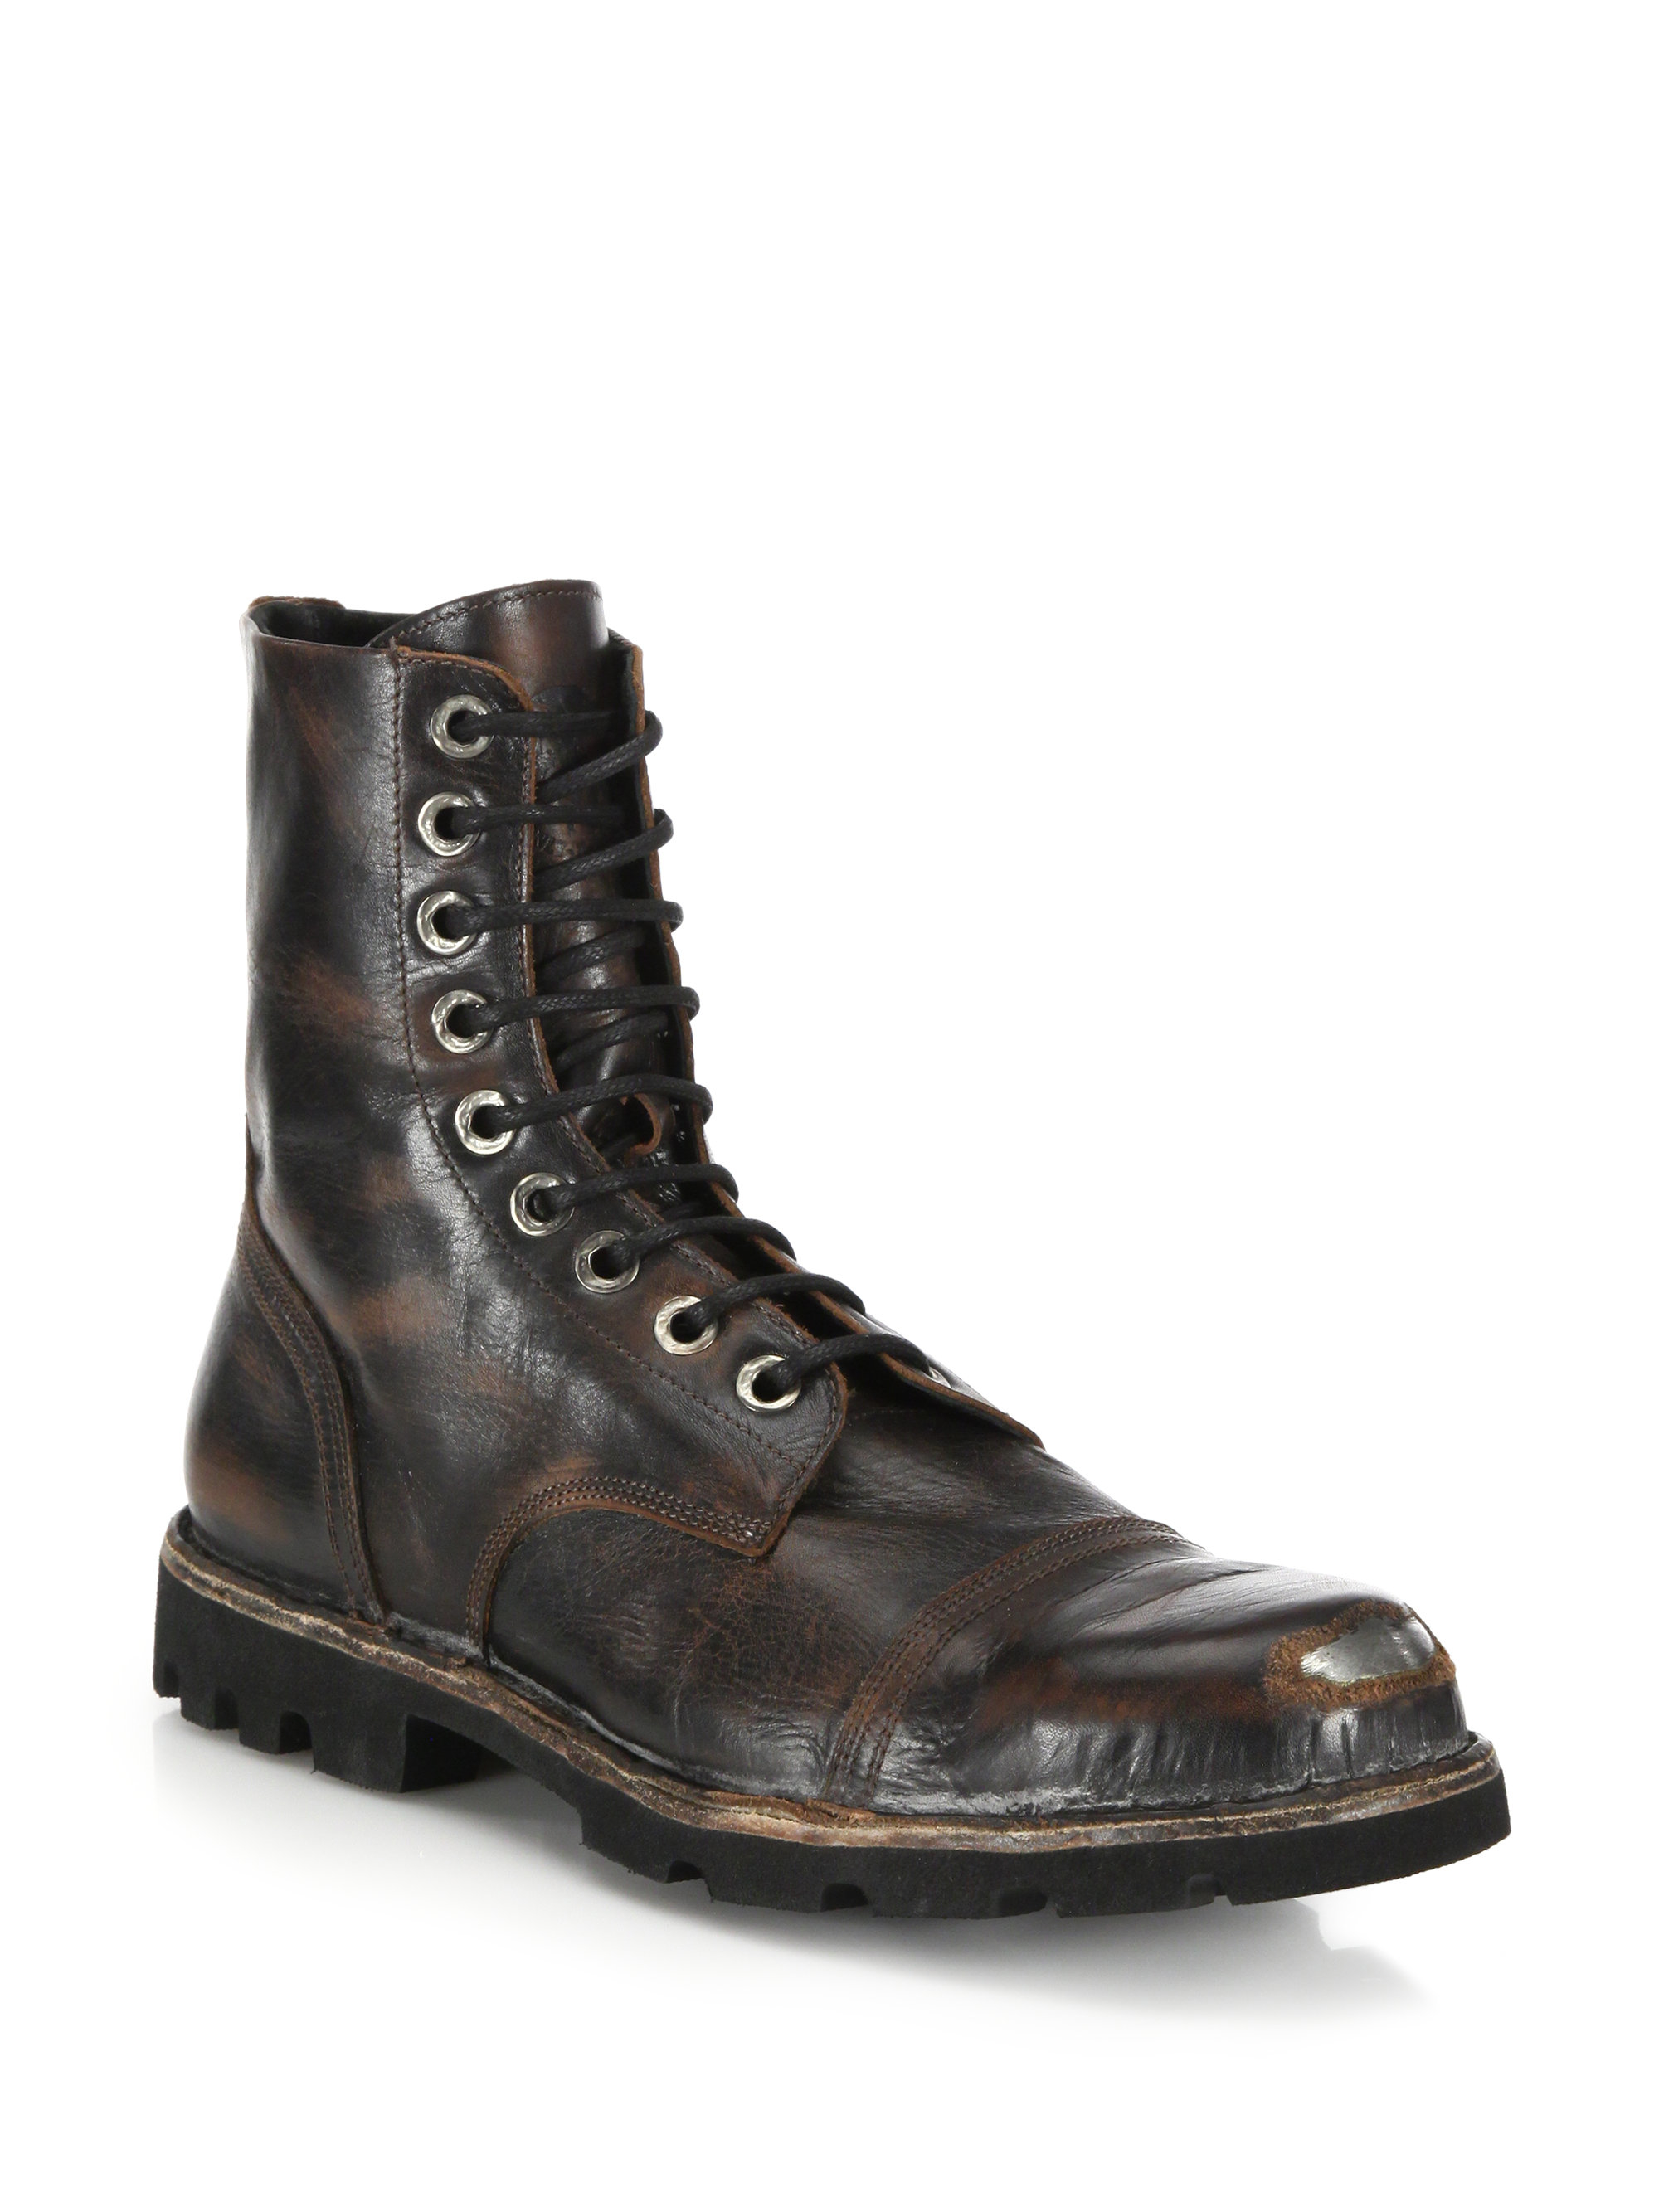 steel toe leather boots